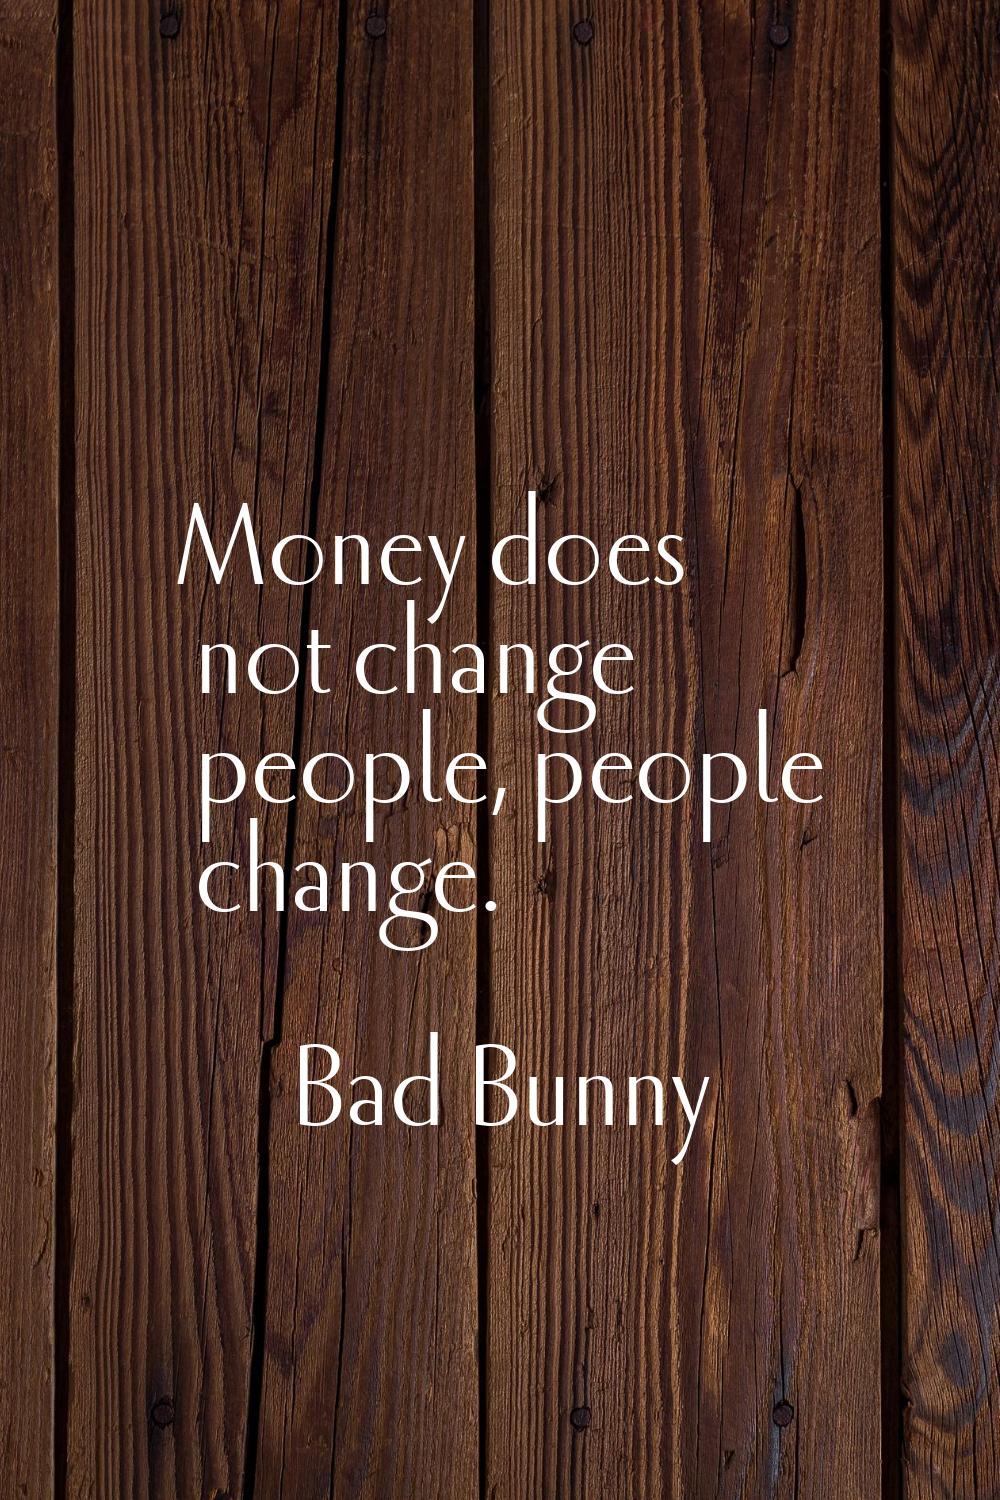 Money does not change people, people change.